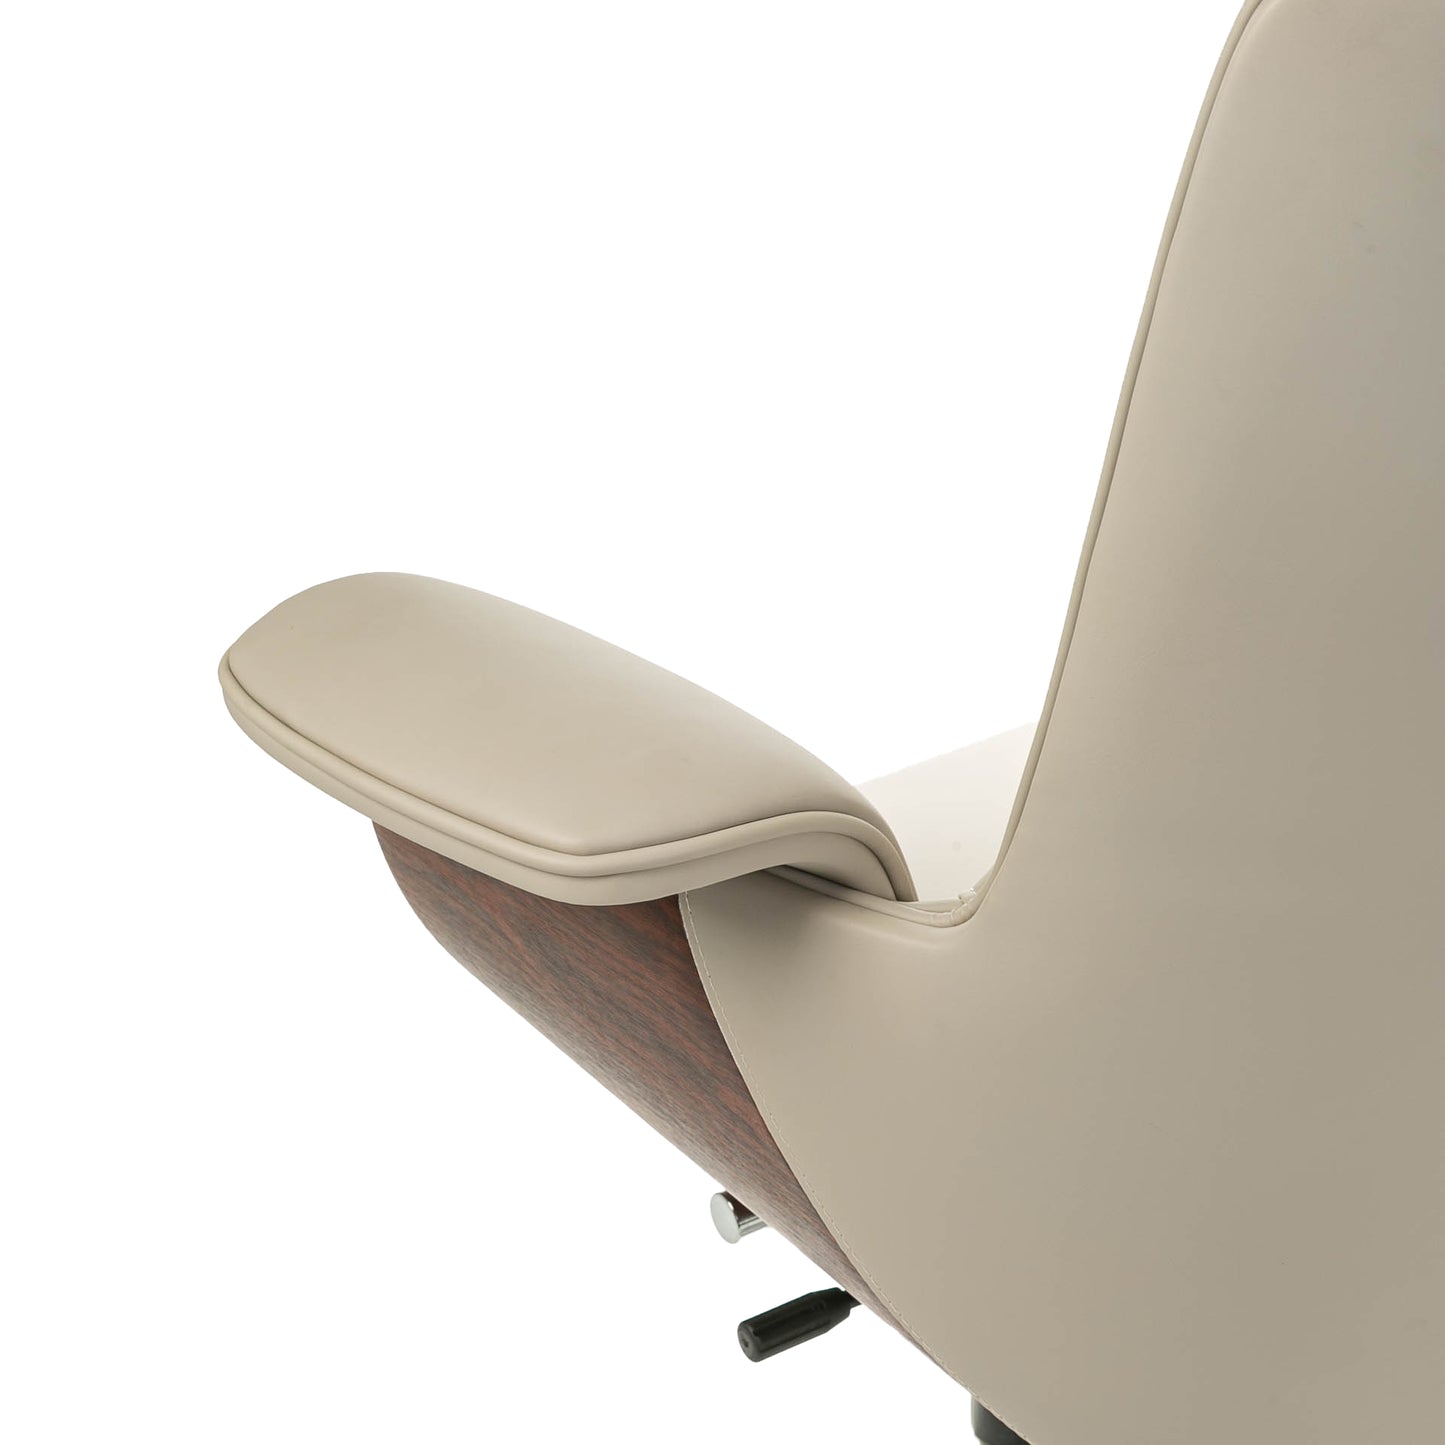 Cosmo Task Chair - ContractWorld Furniture